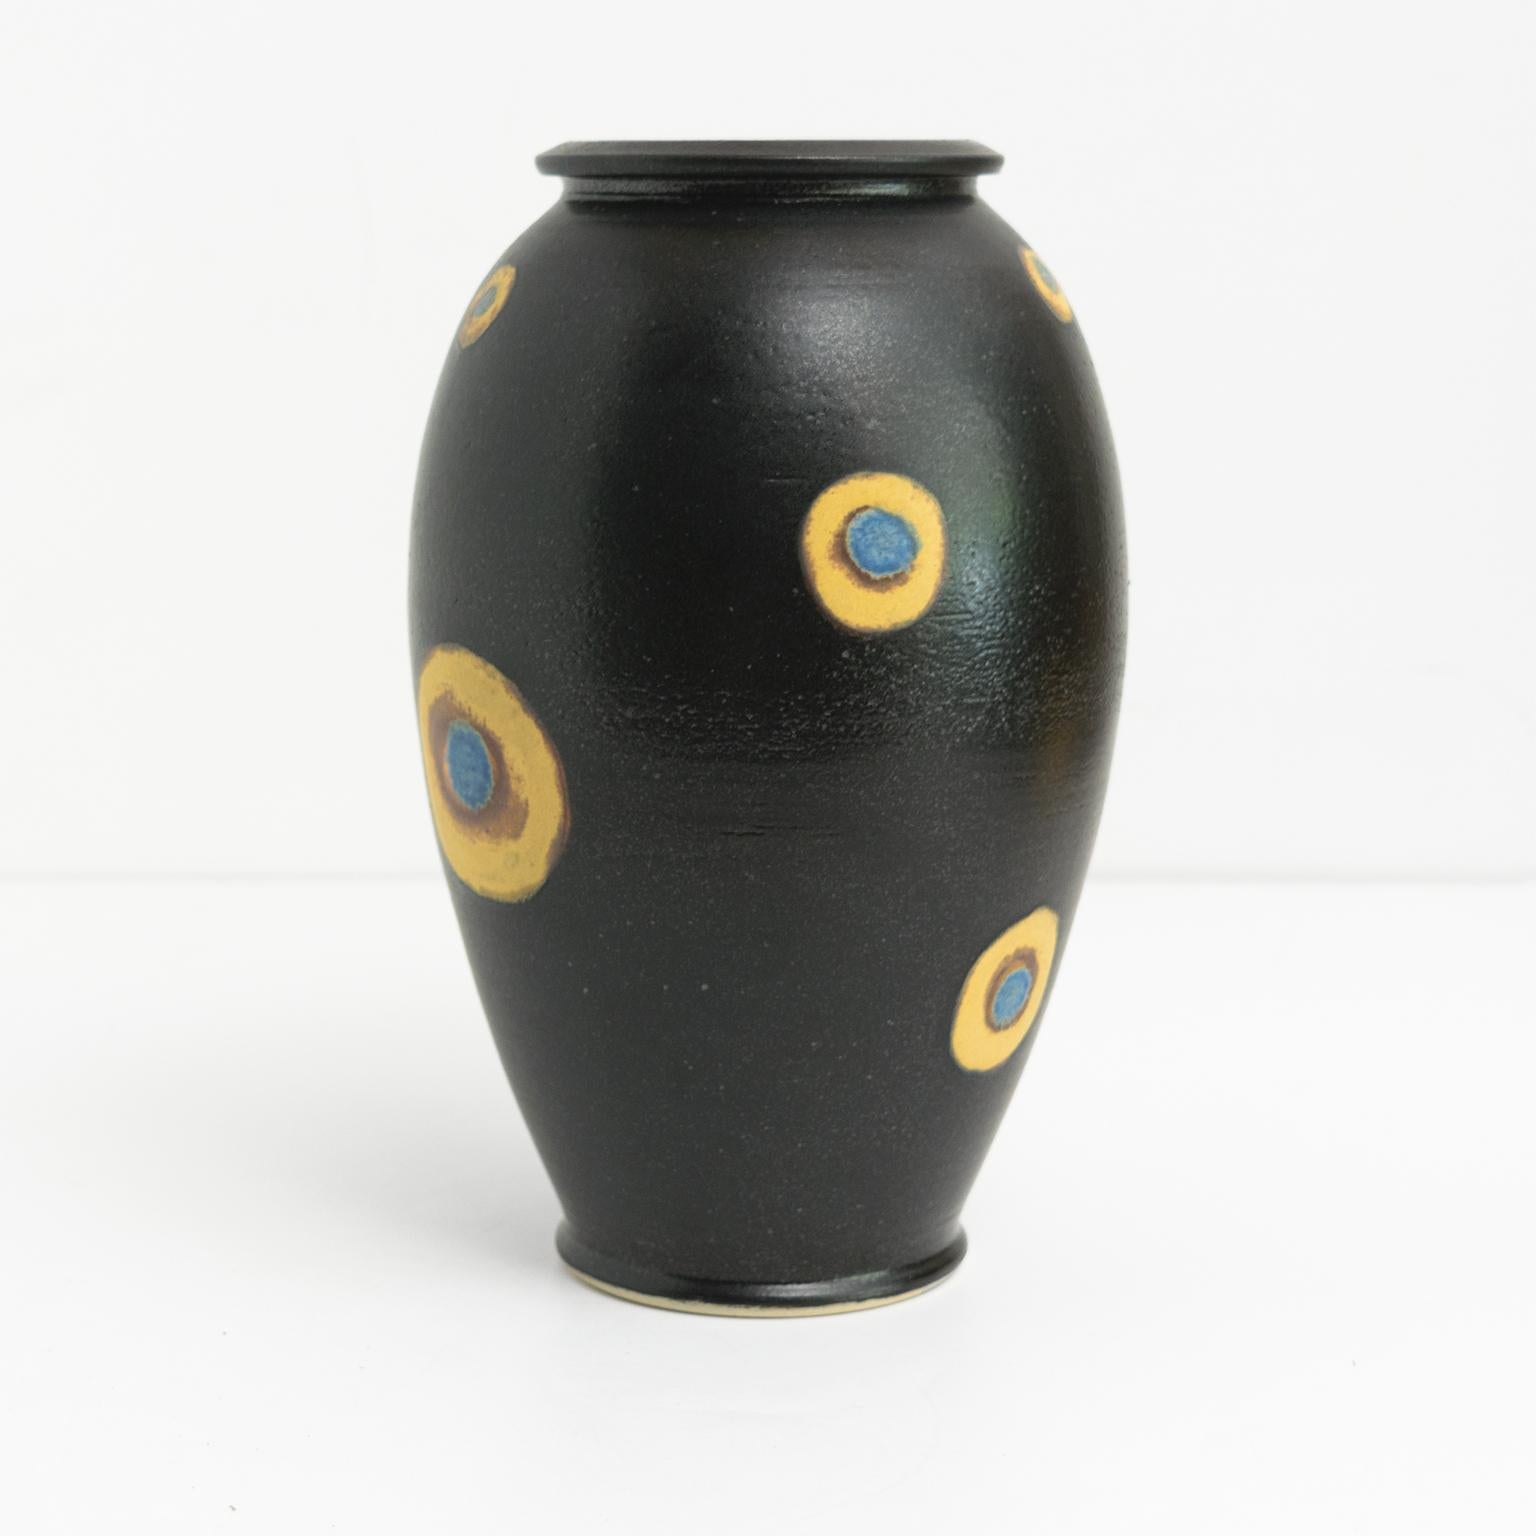 BO Scullman unique vase in stoneware from his own workshop, glazed in black with yellow and blue decorations, signed on bottom “Bo Scullman”. Made in Sweden, circa 1990.

Measures: Height: 10”, diameter 6”.